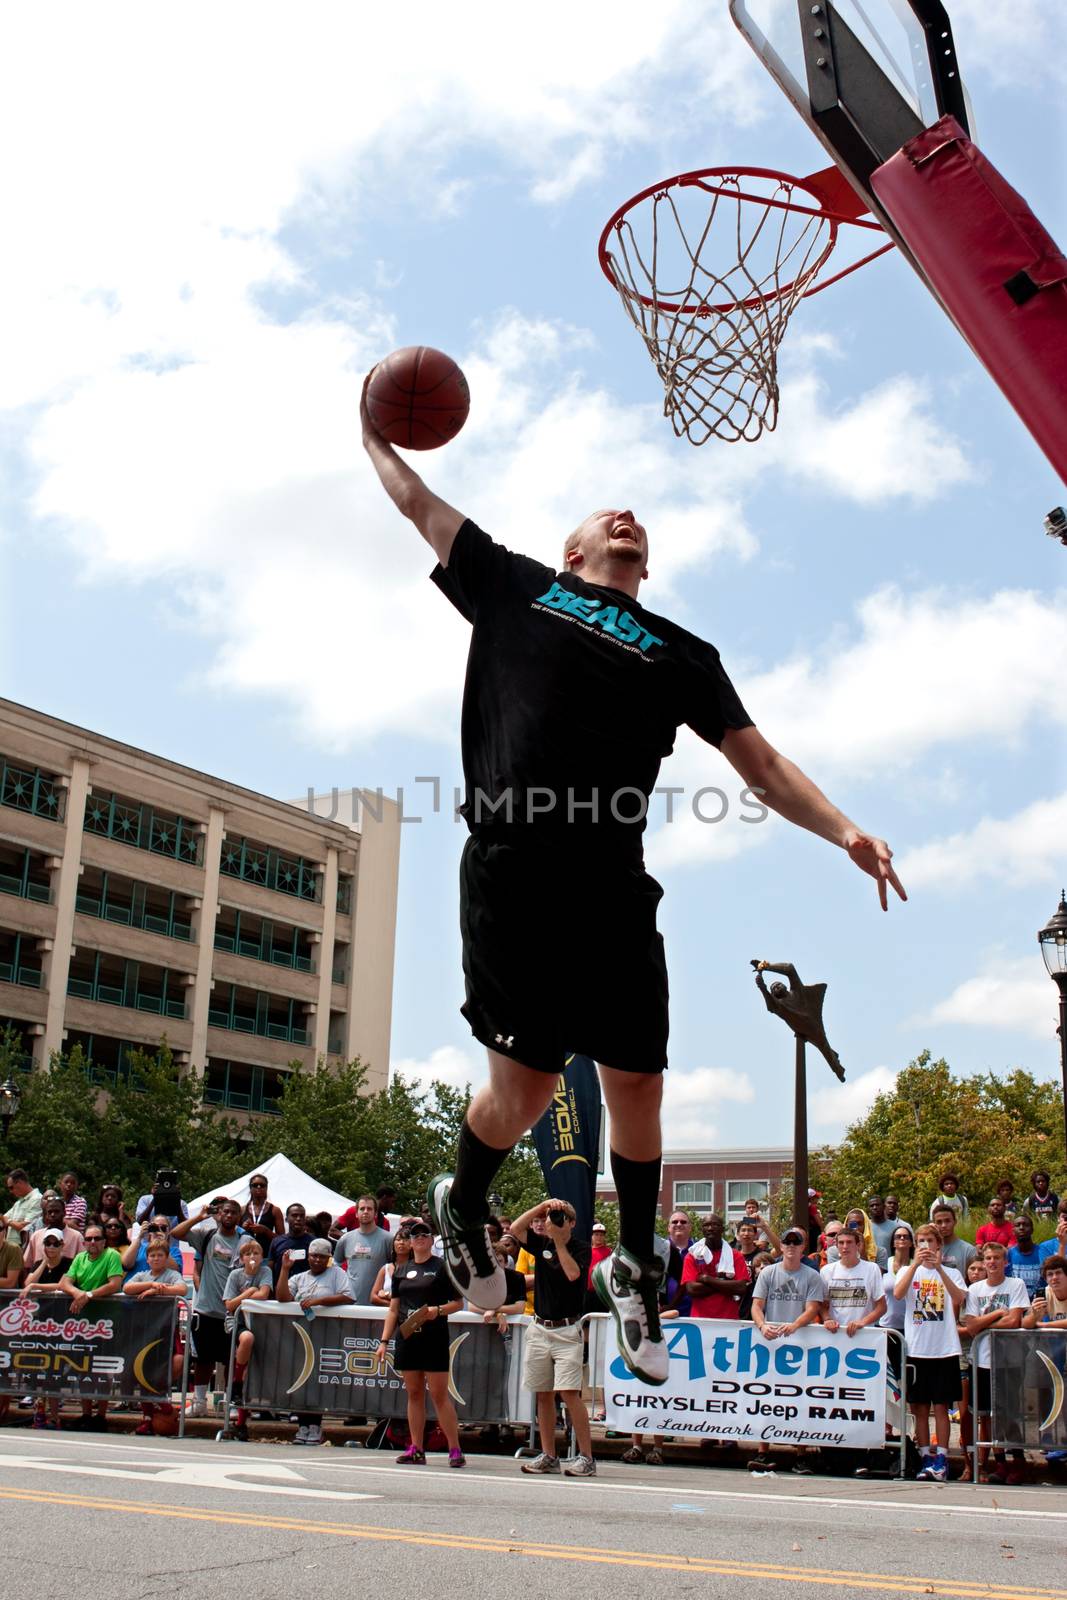 Man Leaps To Jam Basketball In Outdoor Slam Dunk Contest by BluIz60